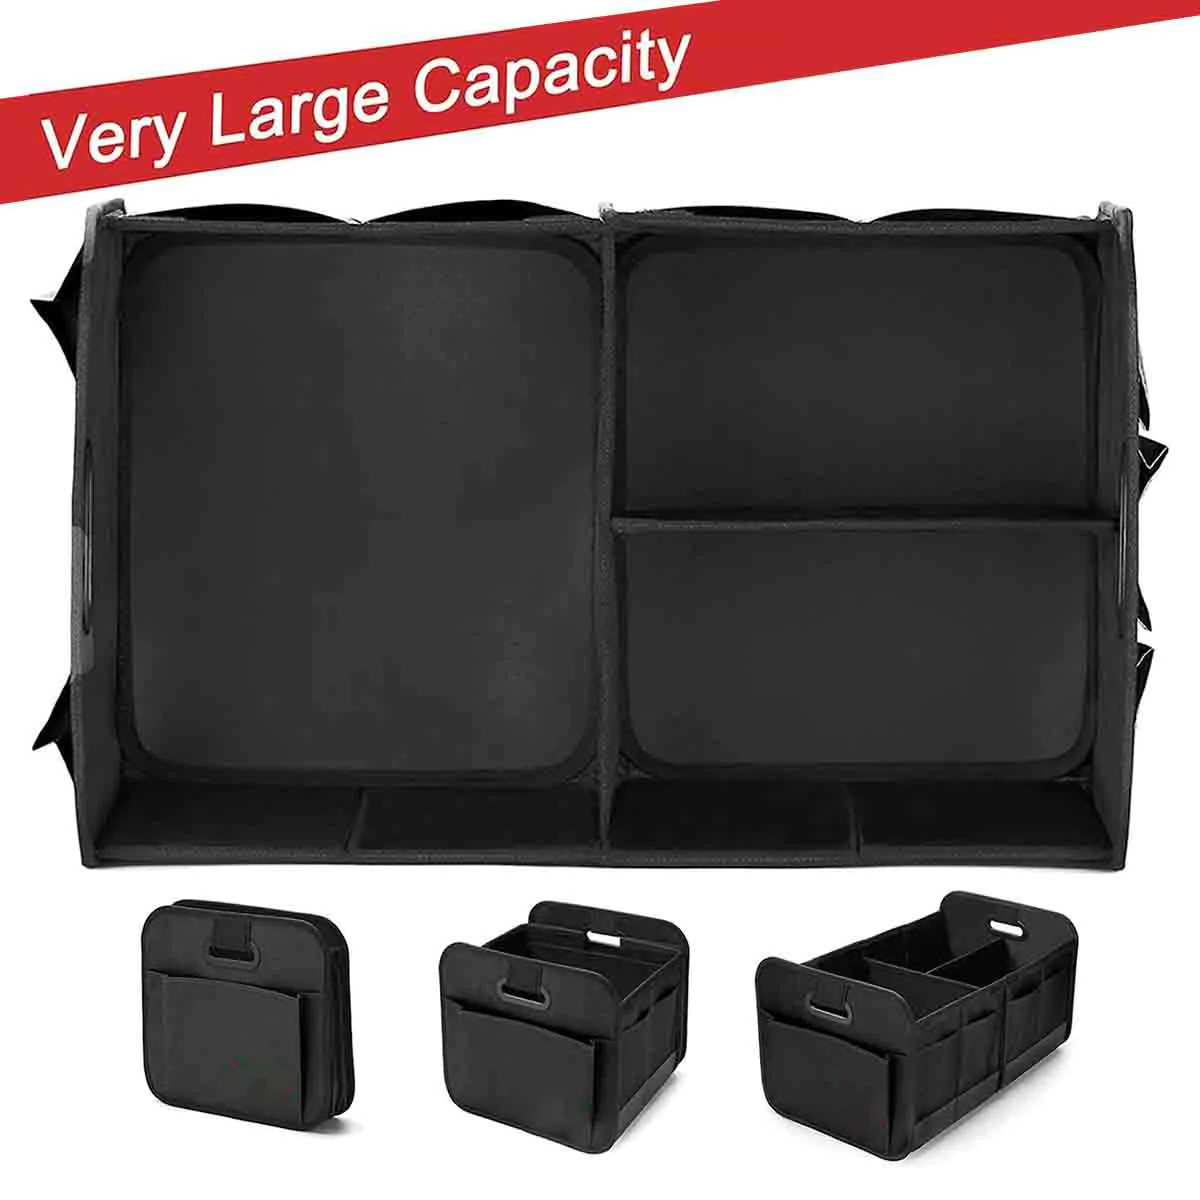 Custom Text For Car Trunk Organizer Storage, Compatible with All Cars, Reinforced Handles, Collapsible Multi, Compartment Car Organizers, Foldable and Waterproof, 600D Oxford Polyester JE12995